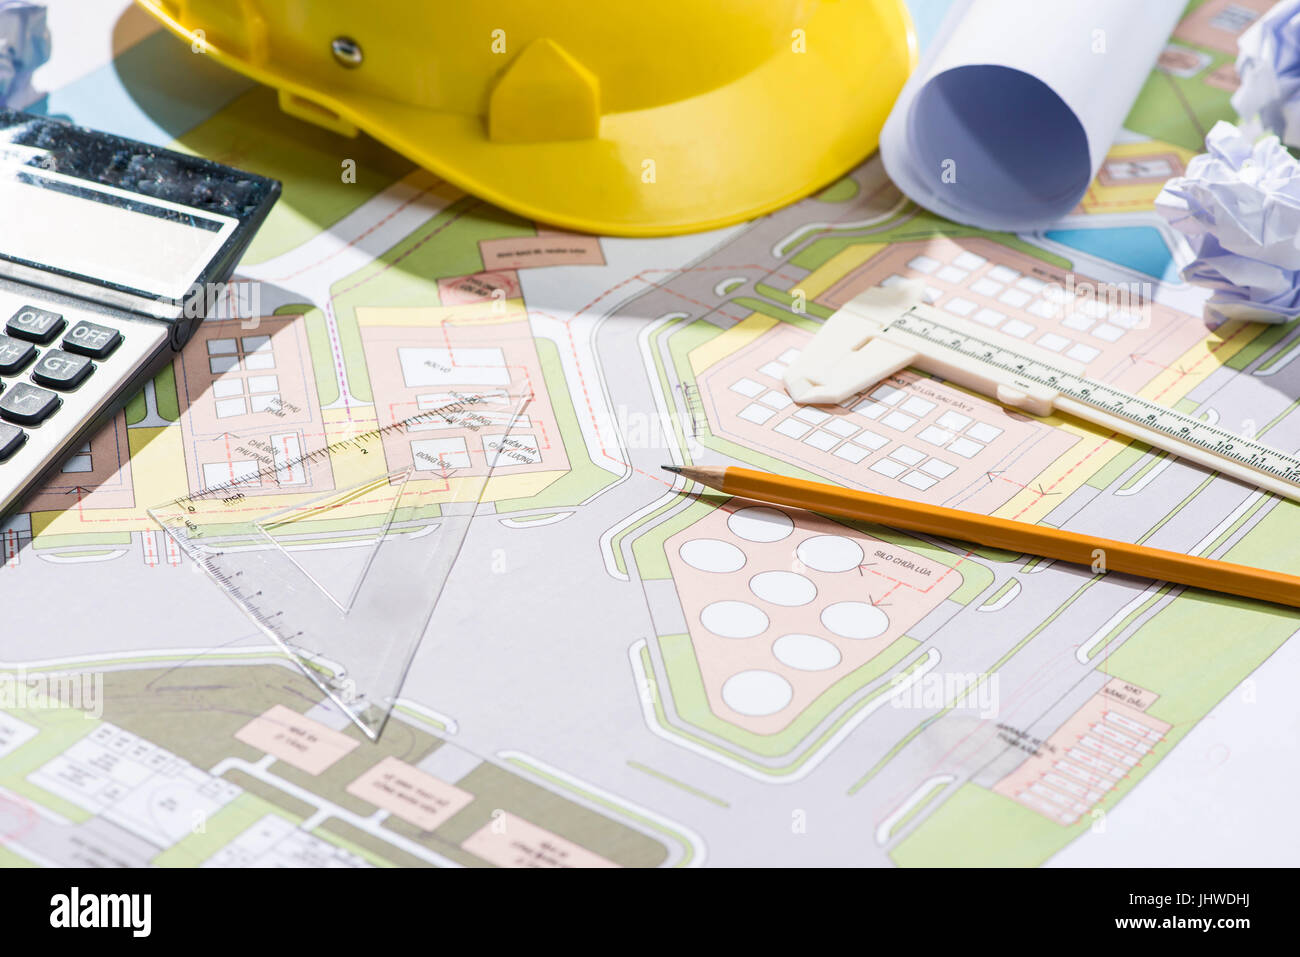 Architects workplace - architectural project with blueprints. Stock Photo